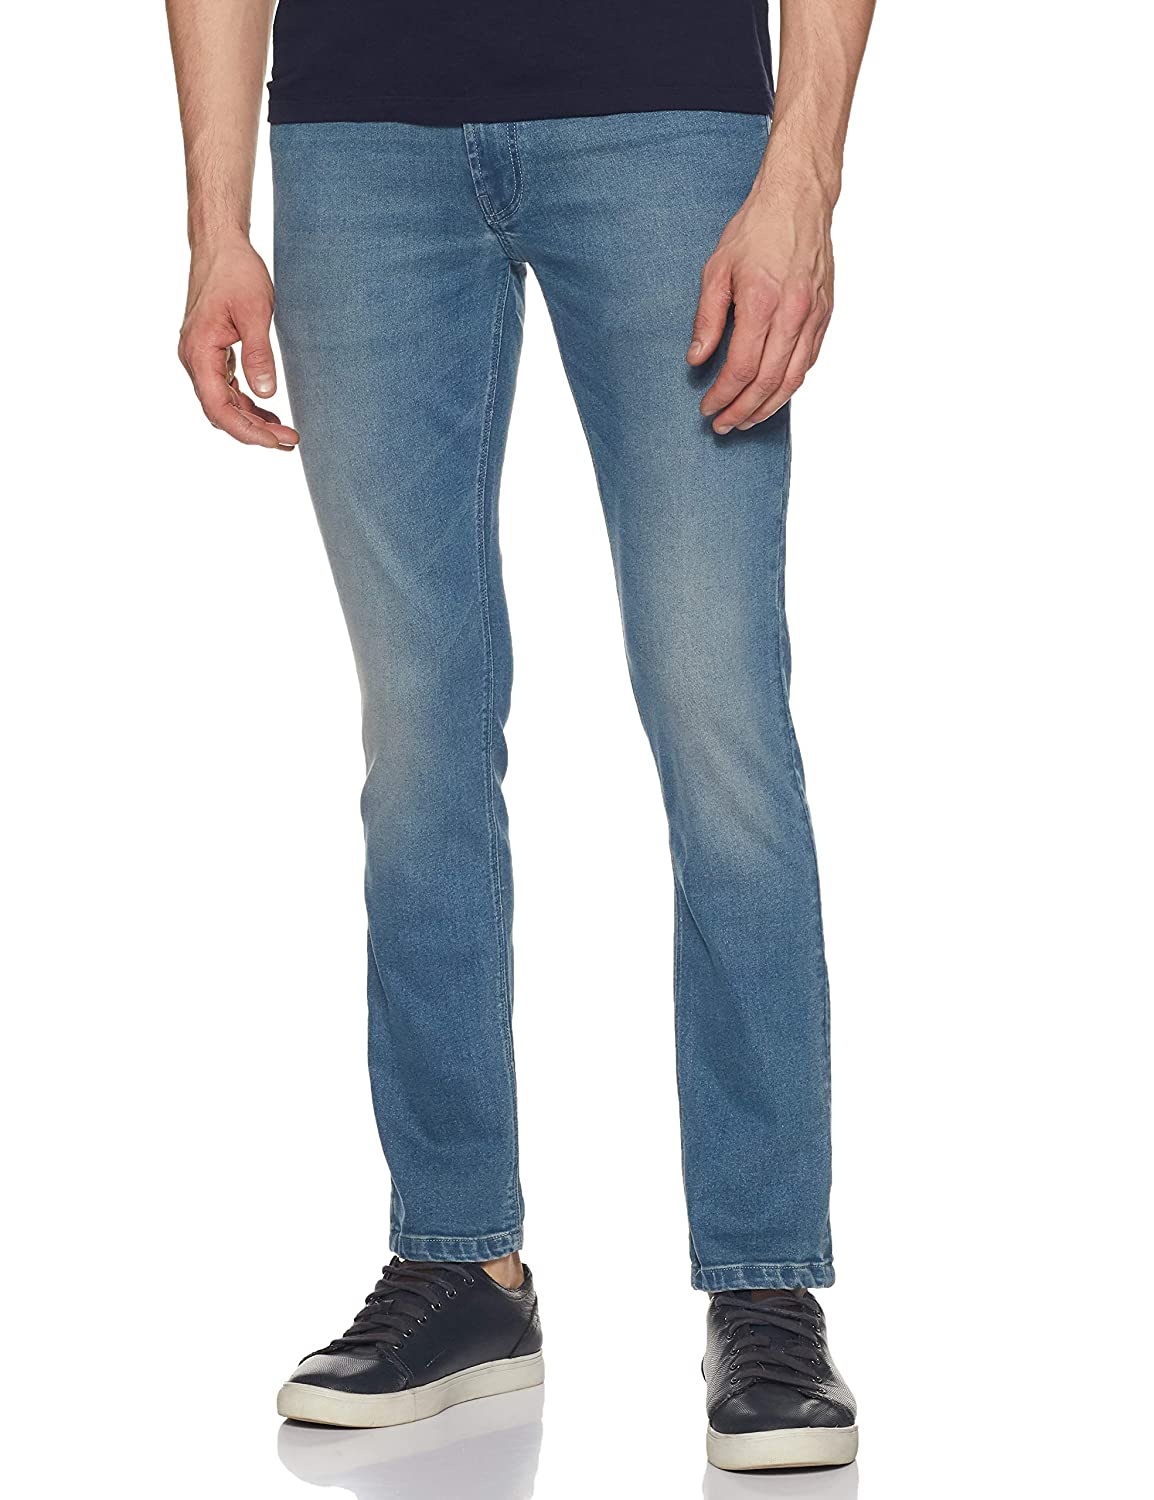 United Colors of Benetton Men's Skinny Fit Jeans - Loot Deal - The Baap ...